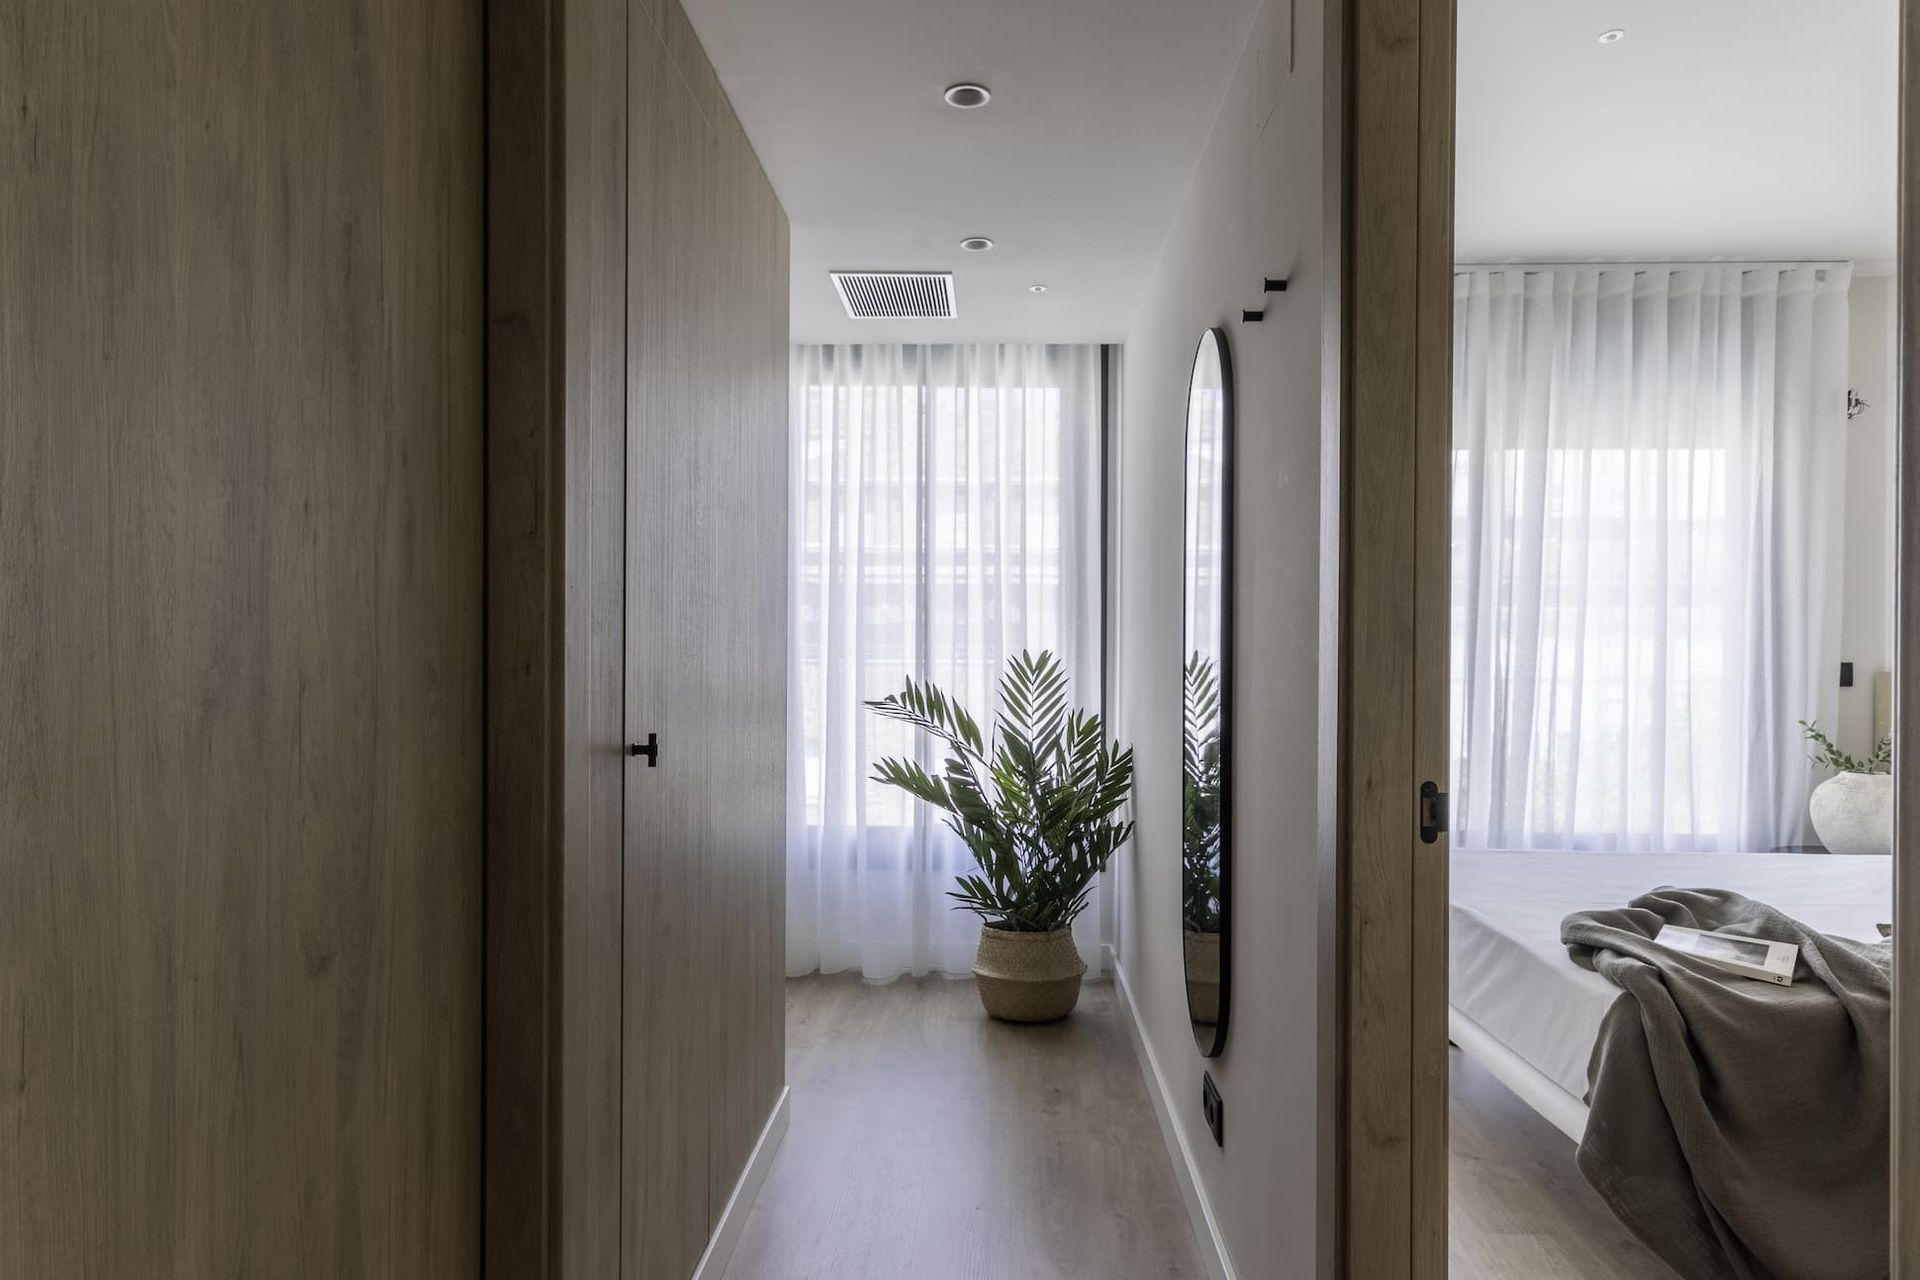 2 bedroom apartment in Pamplona Yamaguchi